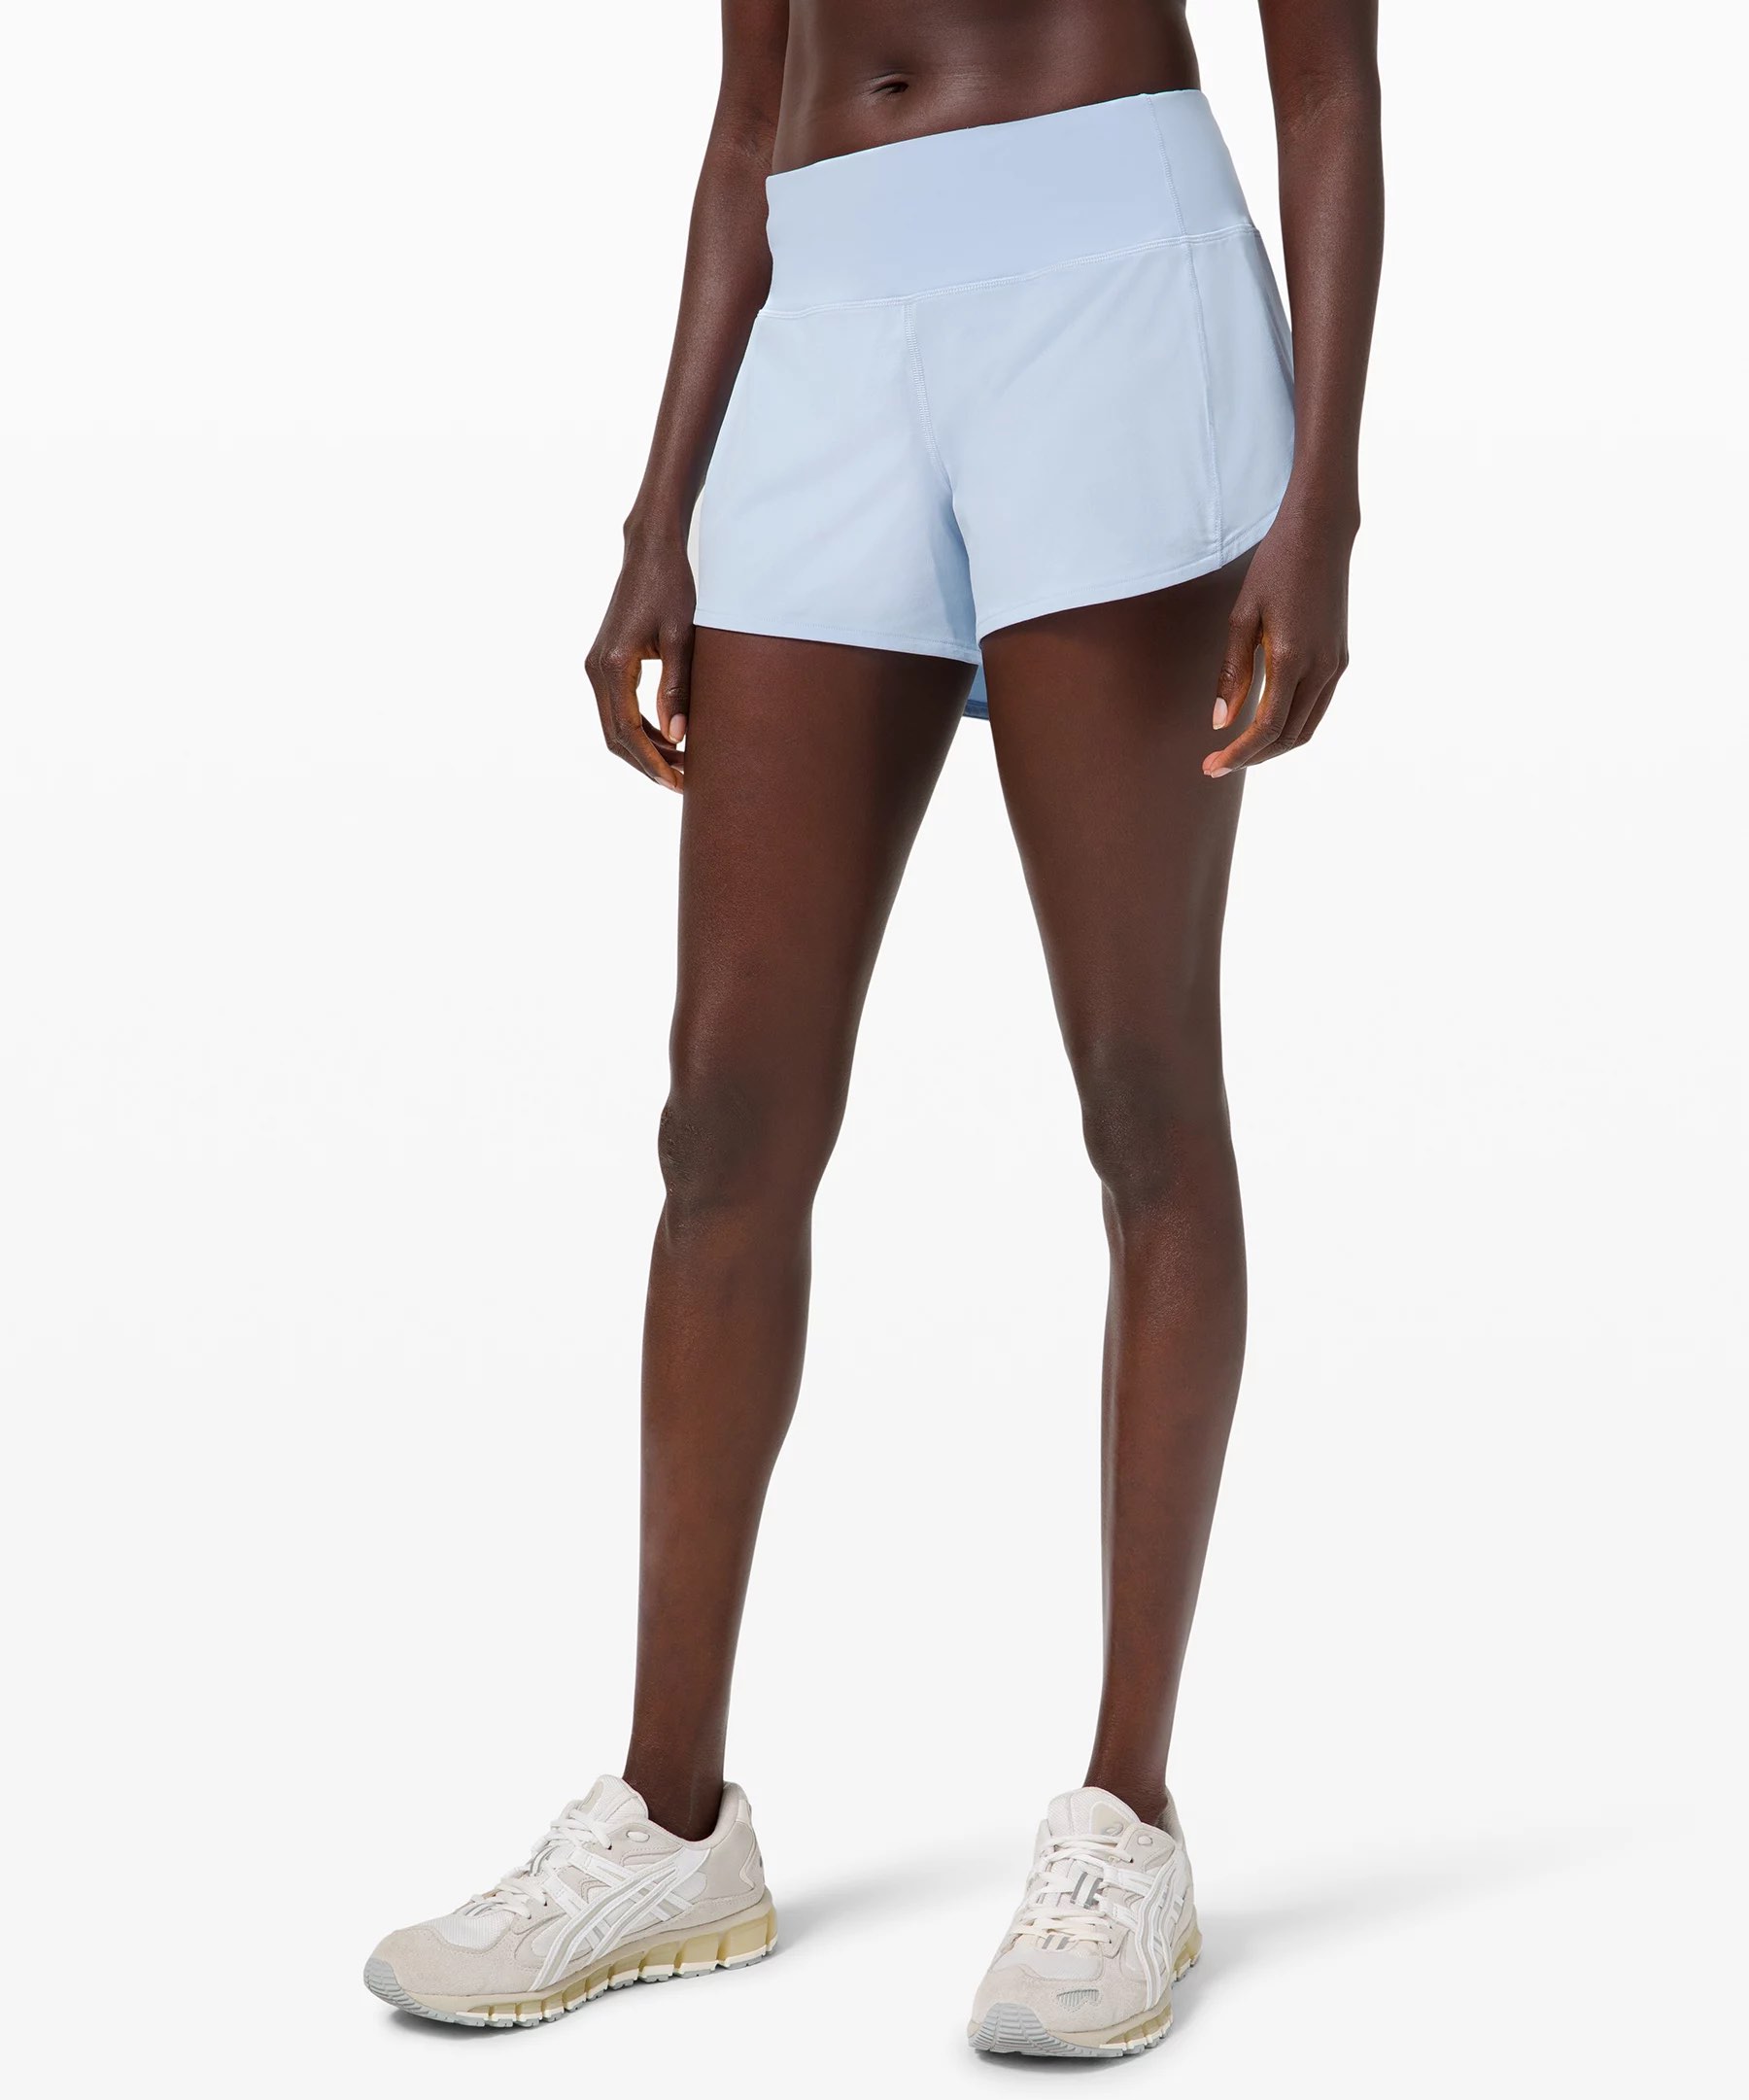 The 14 Best Anti-Chafing Running Shorts for Women in 2022| Well+Good